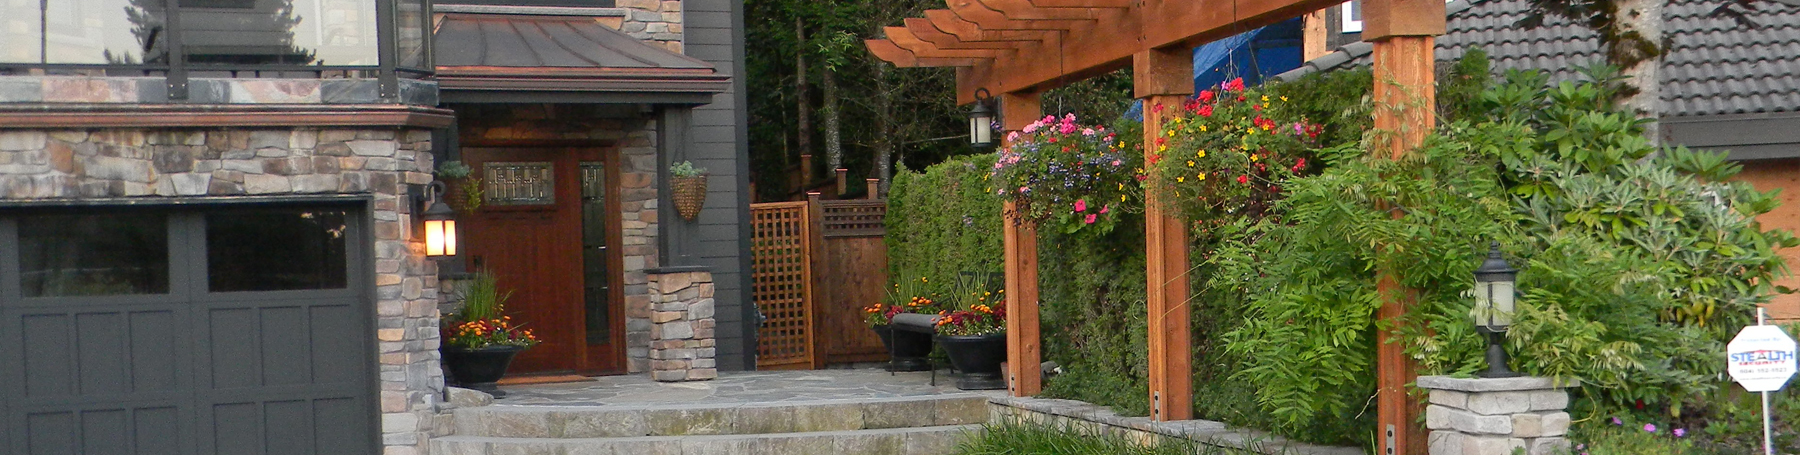 Landscape design and construction South Surrey, White Rock and Greater Vancouver